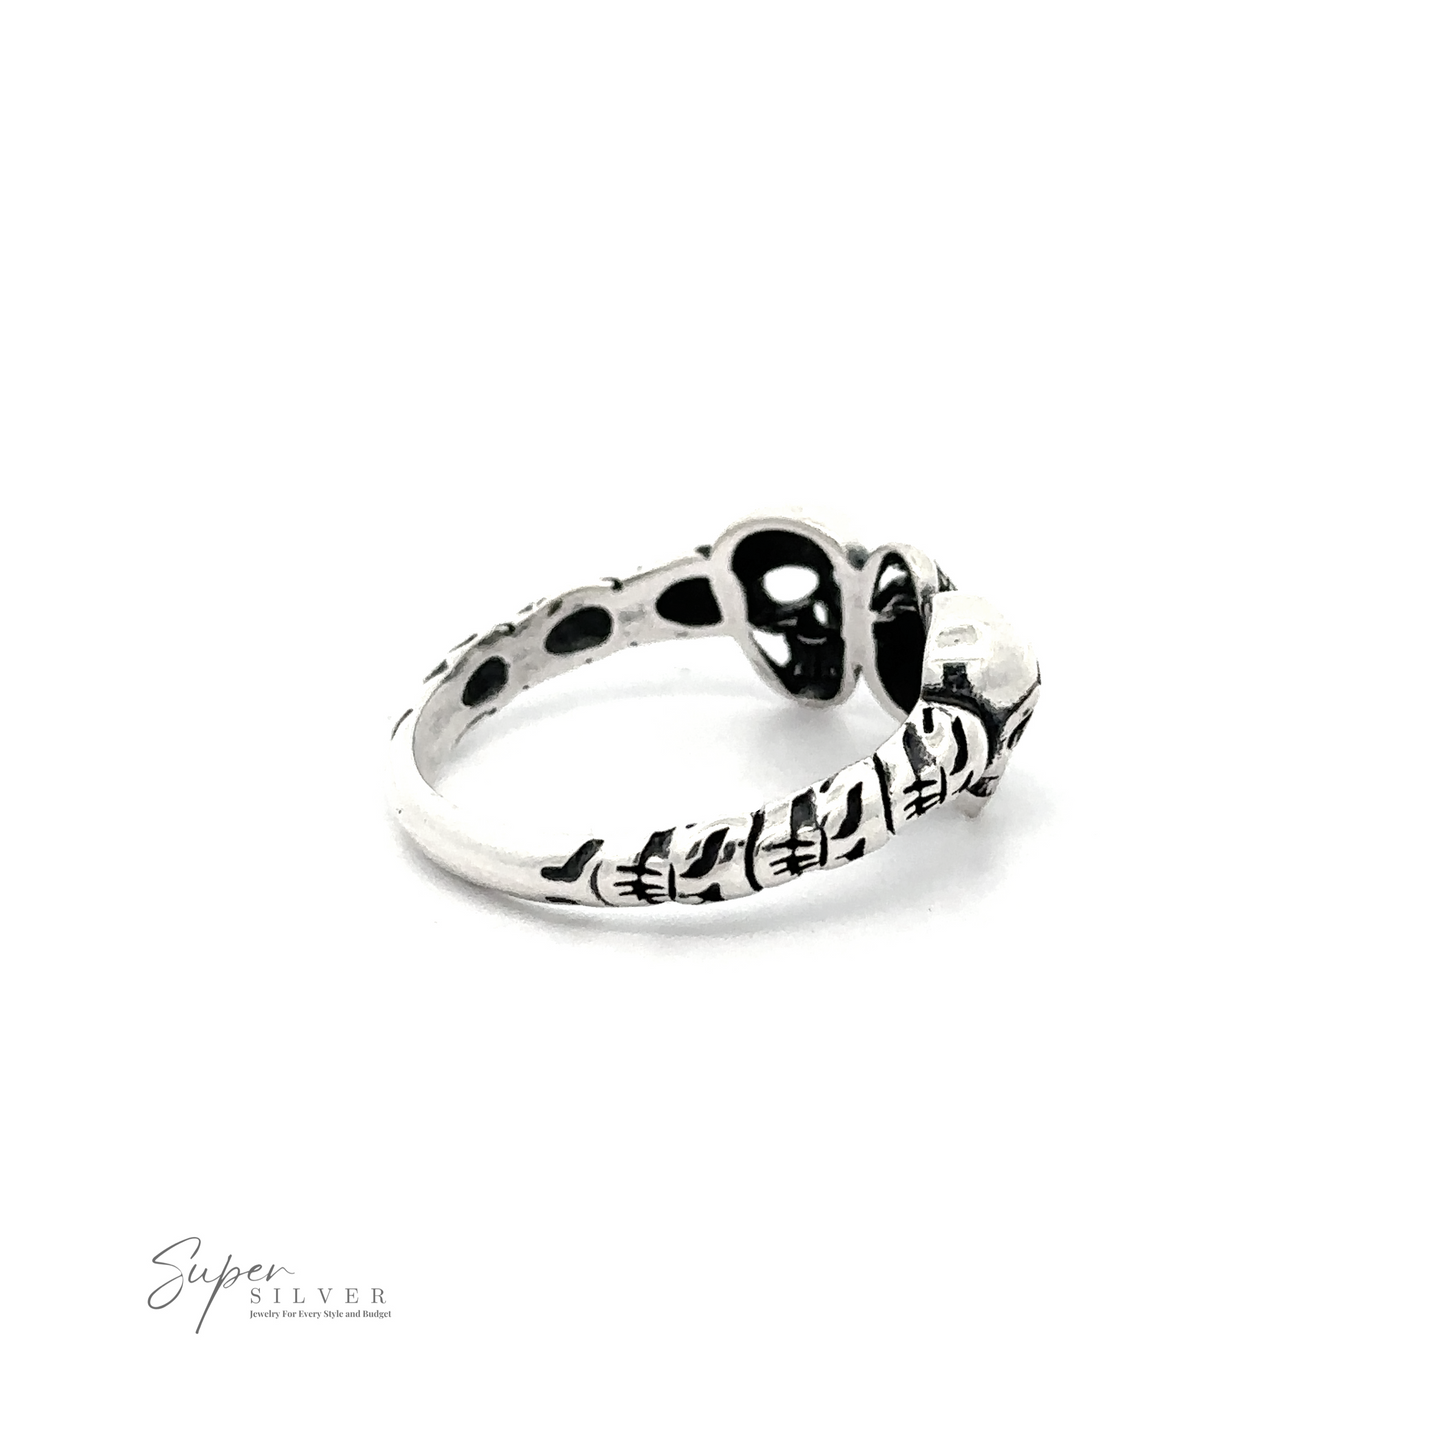 
                  
                    Three Skulls Ring with black skull design and engraved patterns against a white background.
                  
                